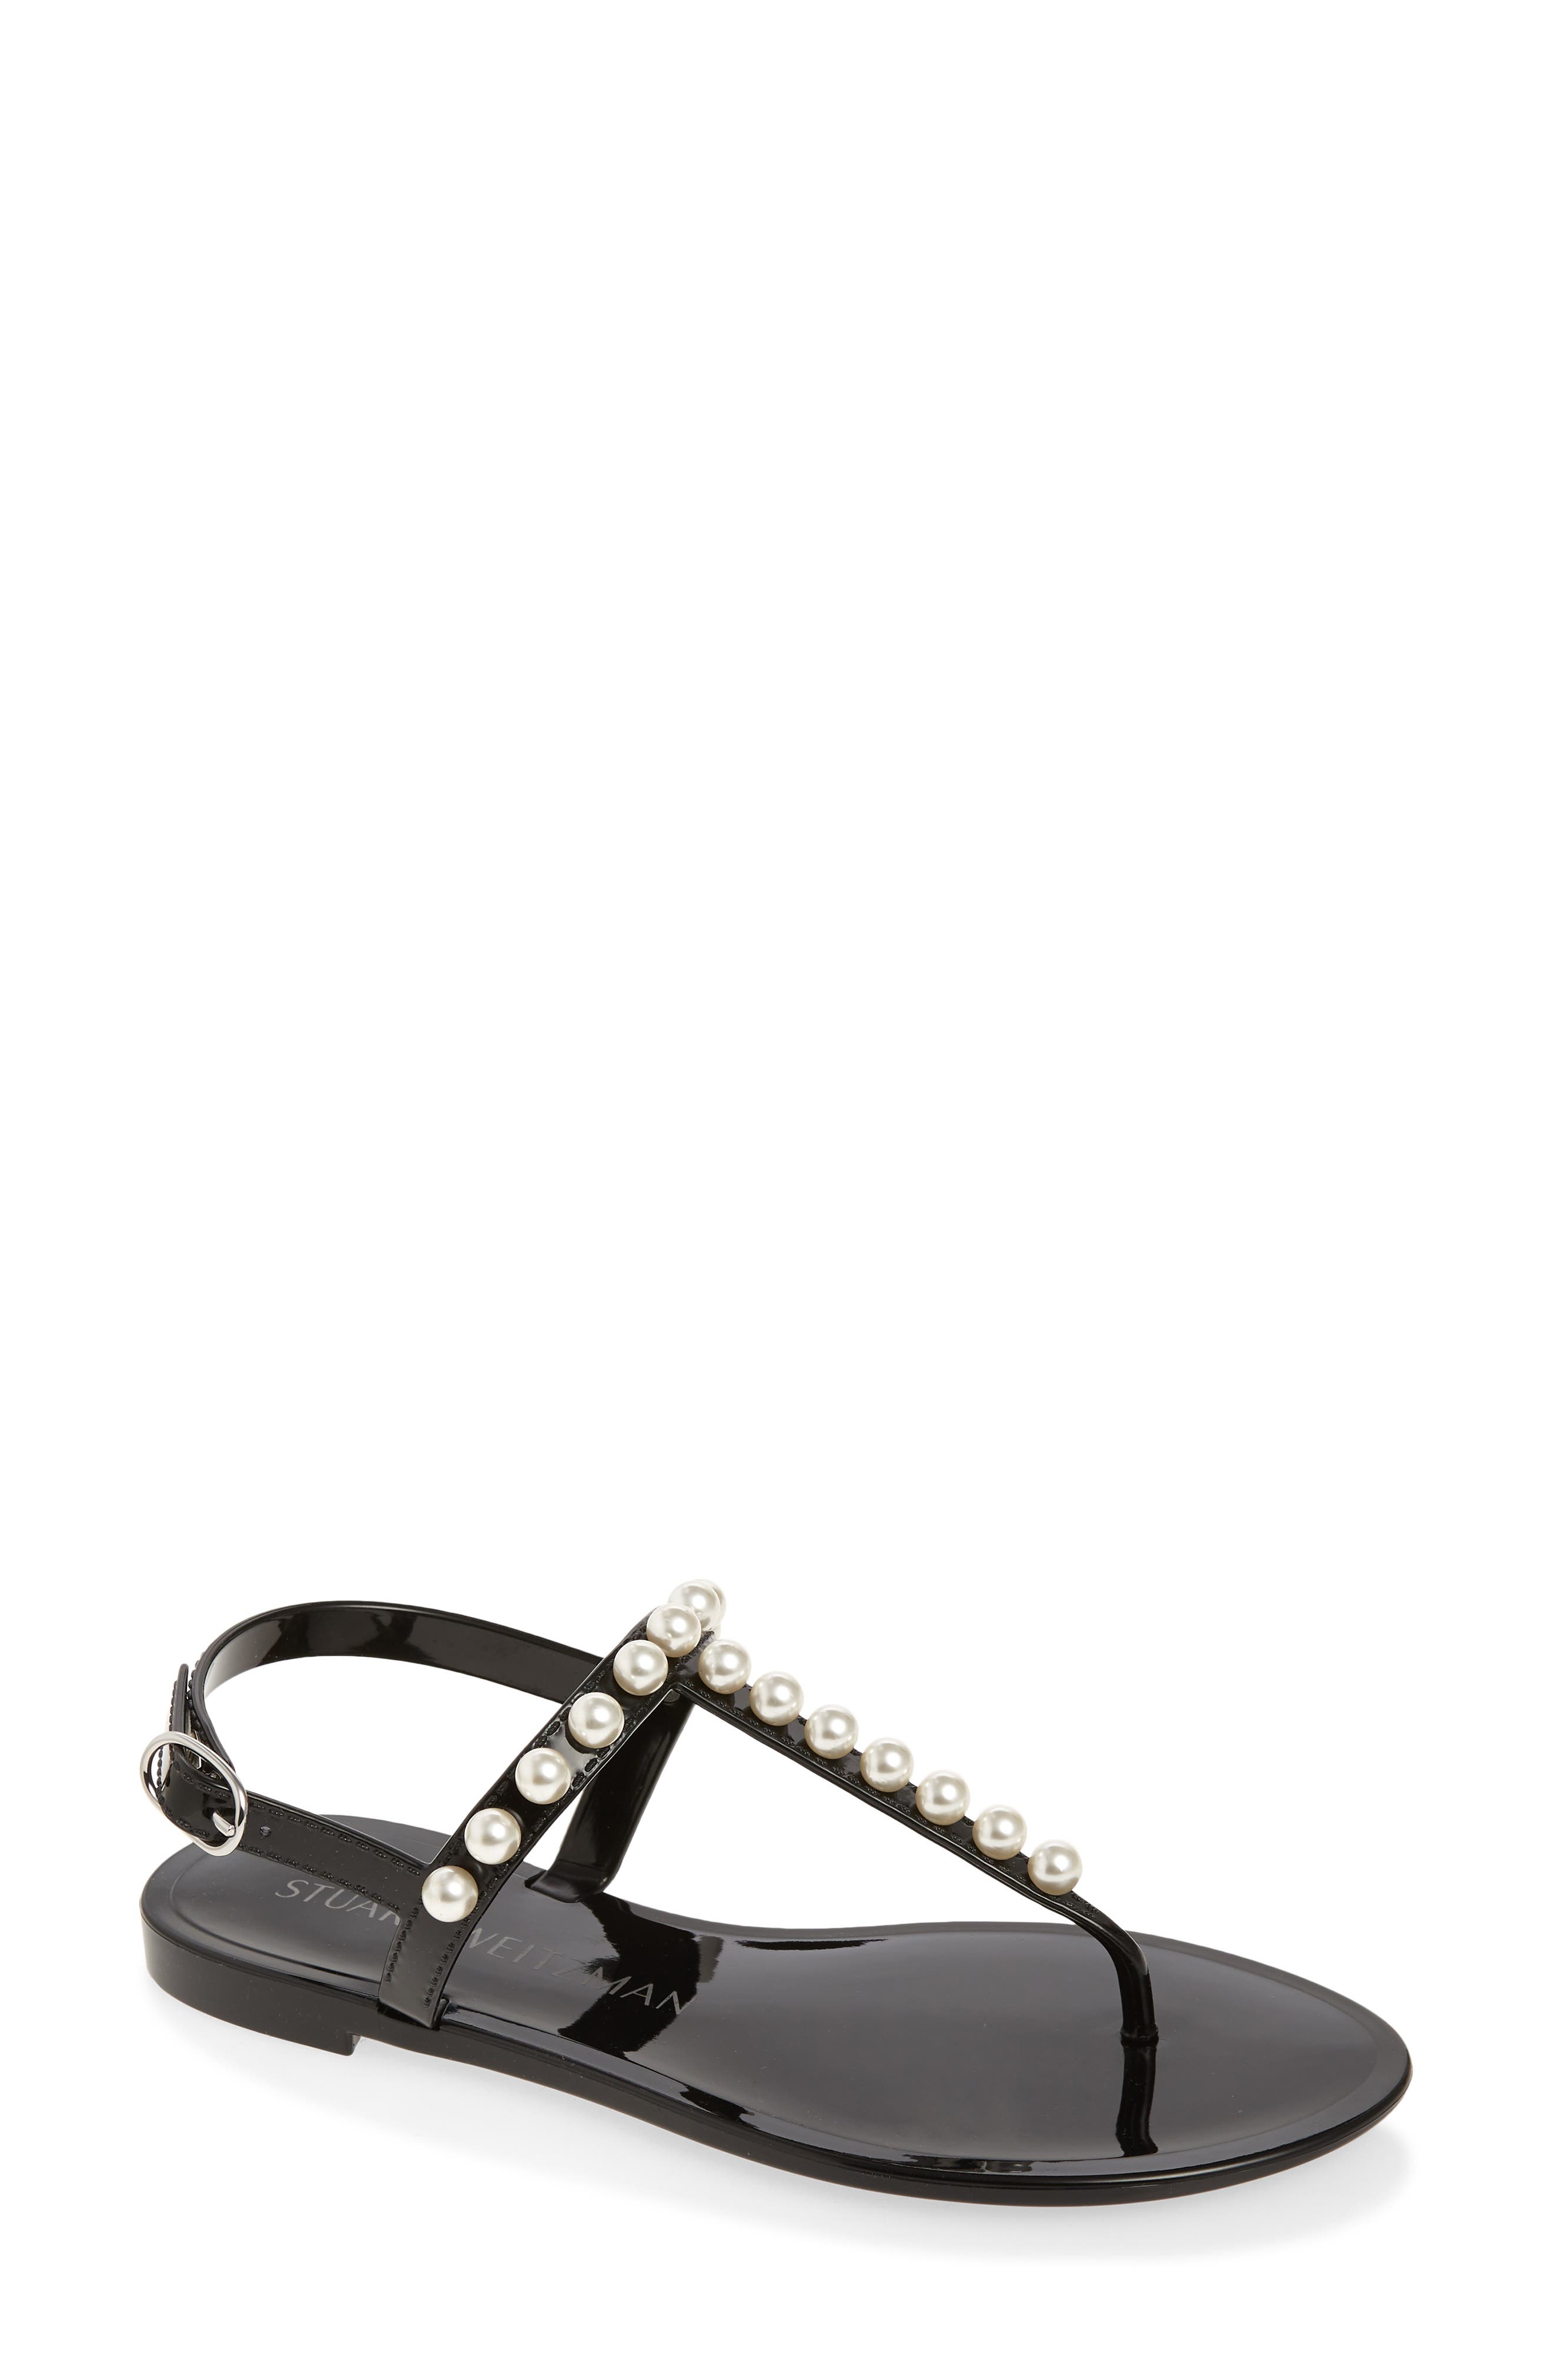 Stuart Weitzman Goldie Jelly Sandal in Black at Nordstrom, Size 11